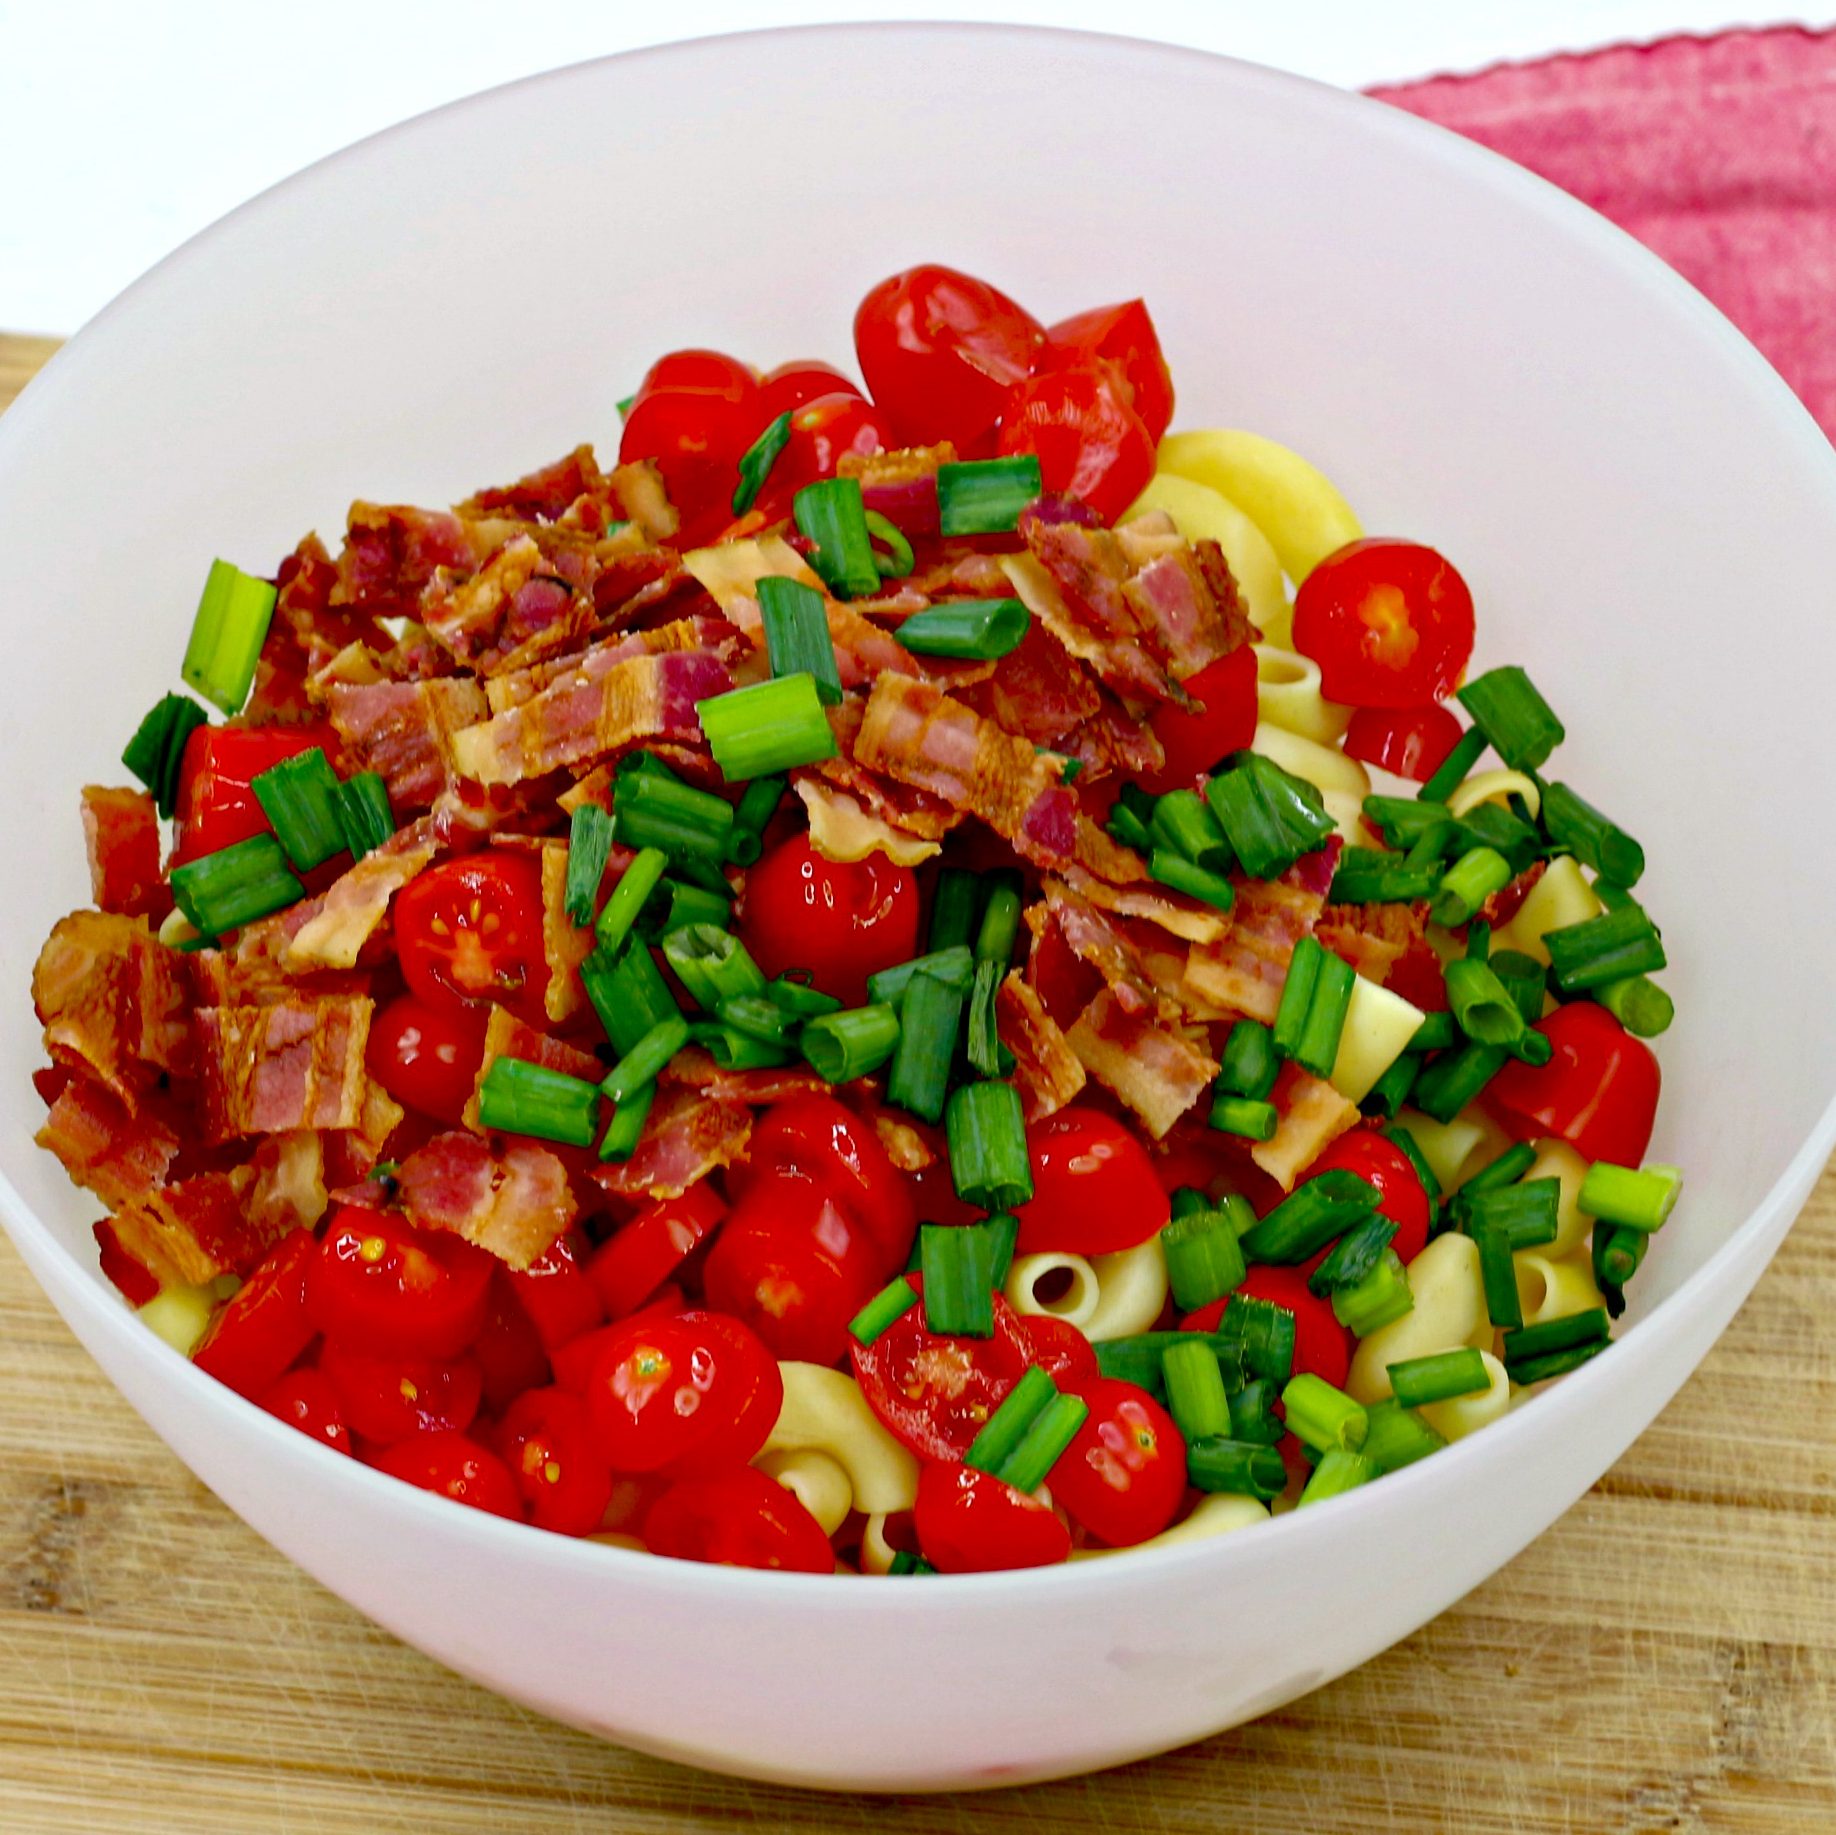 In a large bowl, add the cooked pasta, crumbled bacon, sliced tomatoes, and green onions.